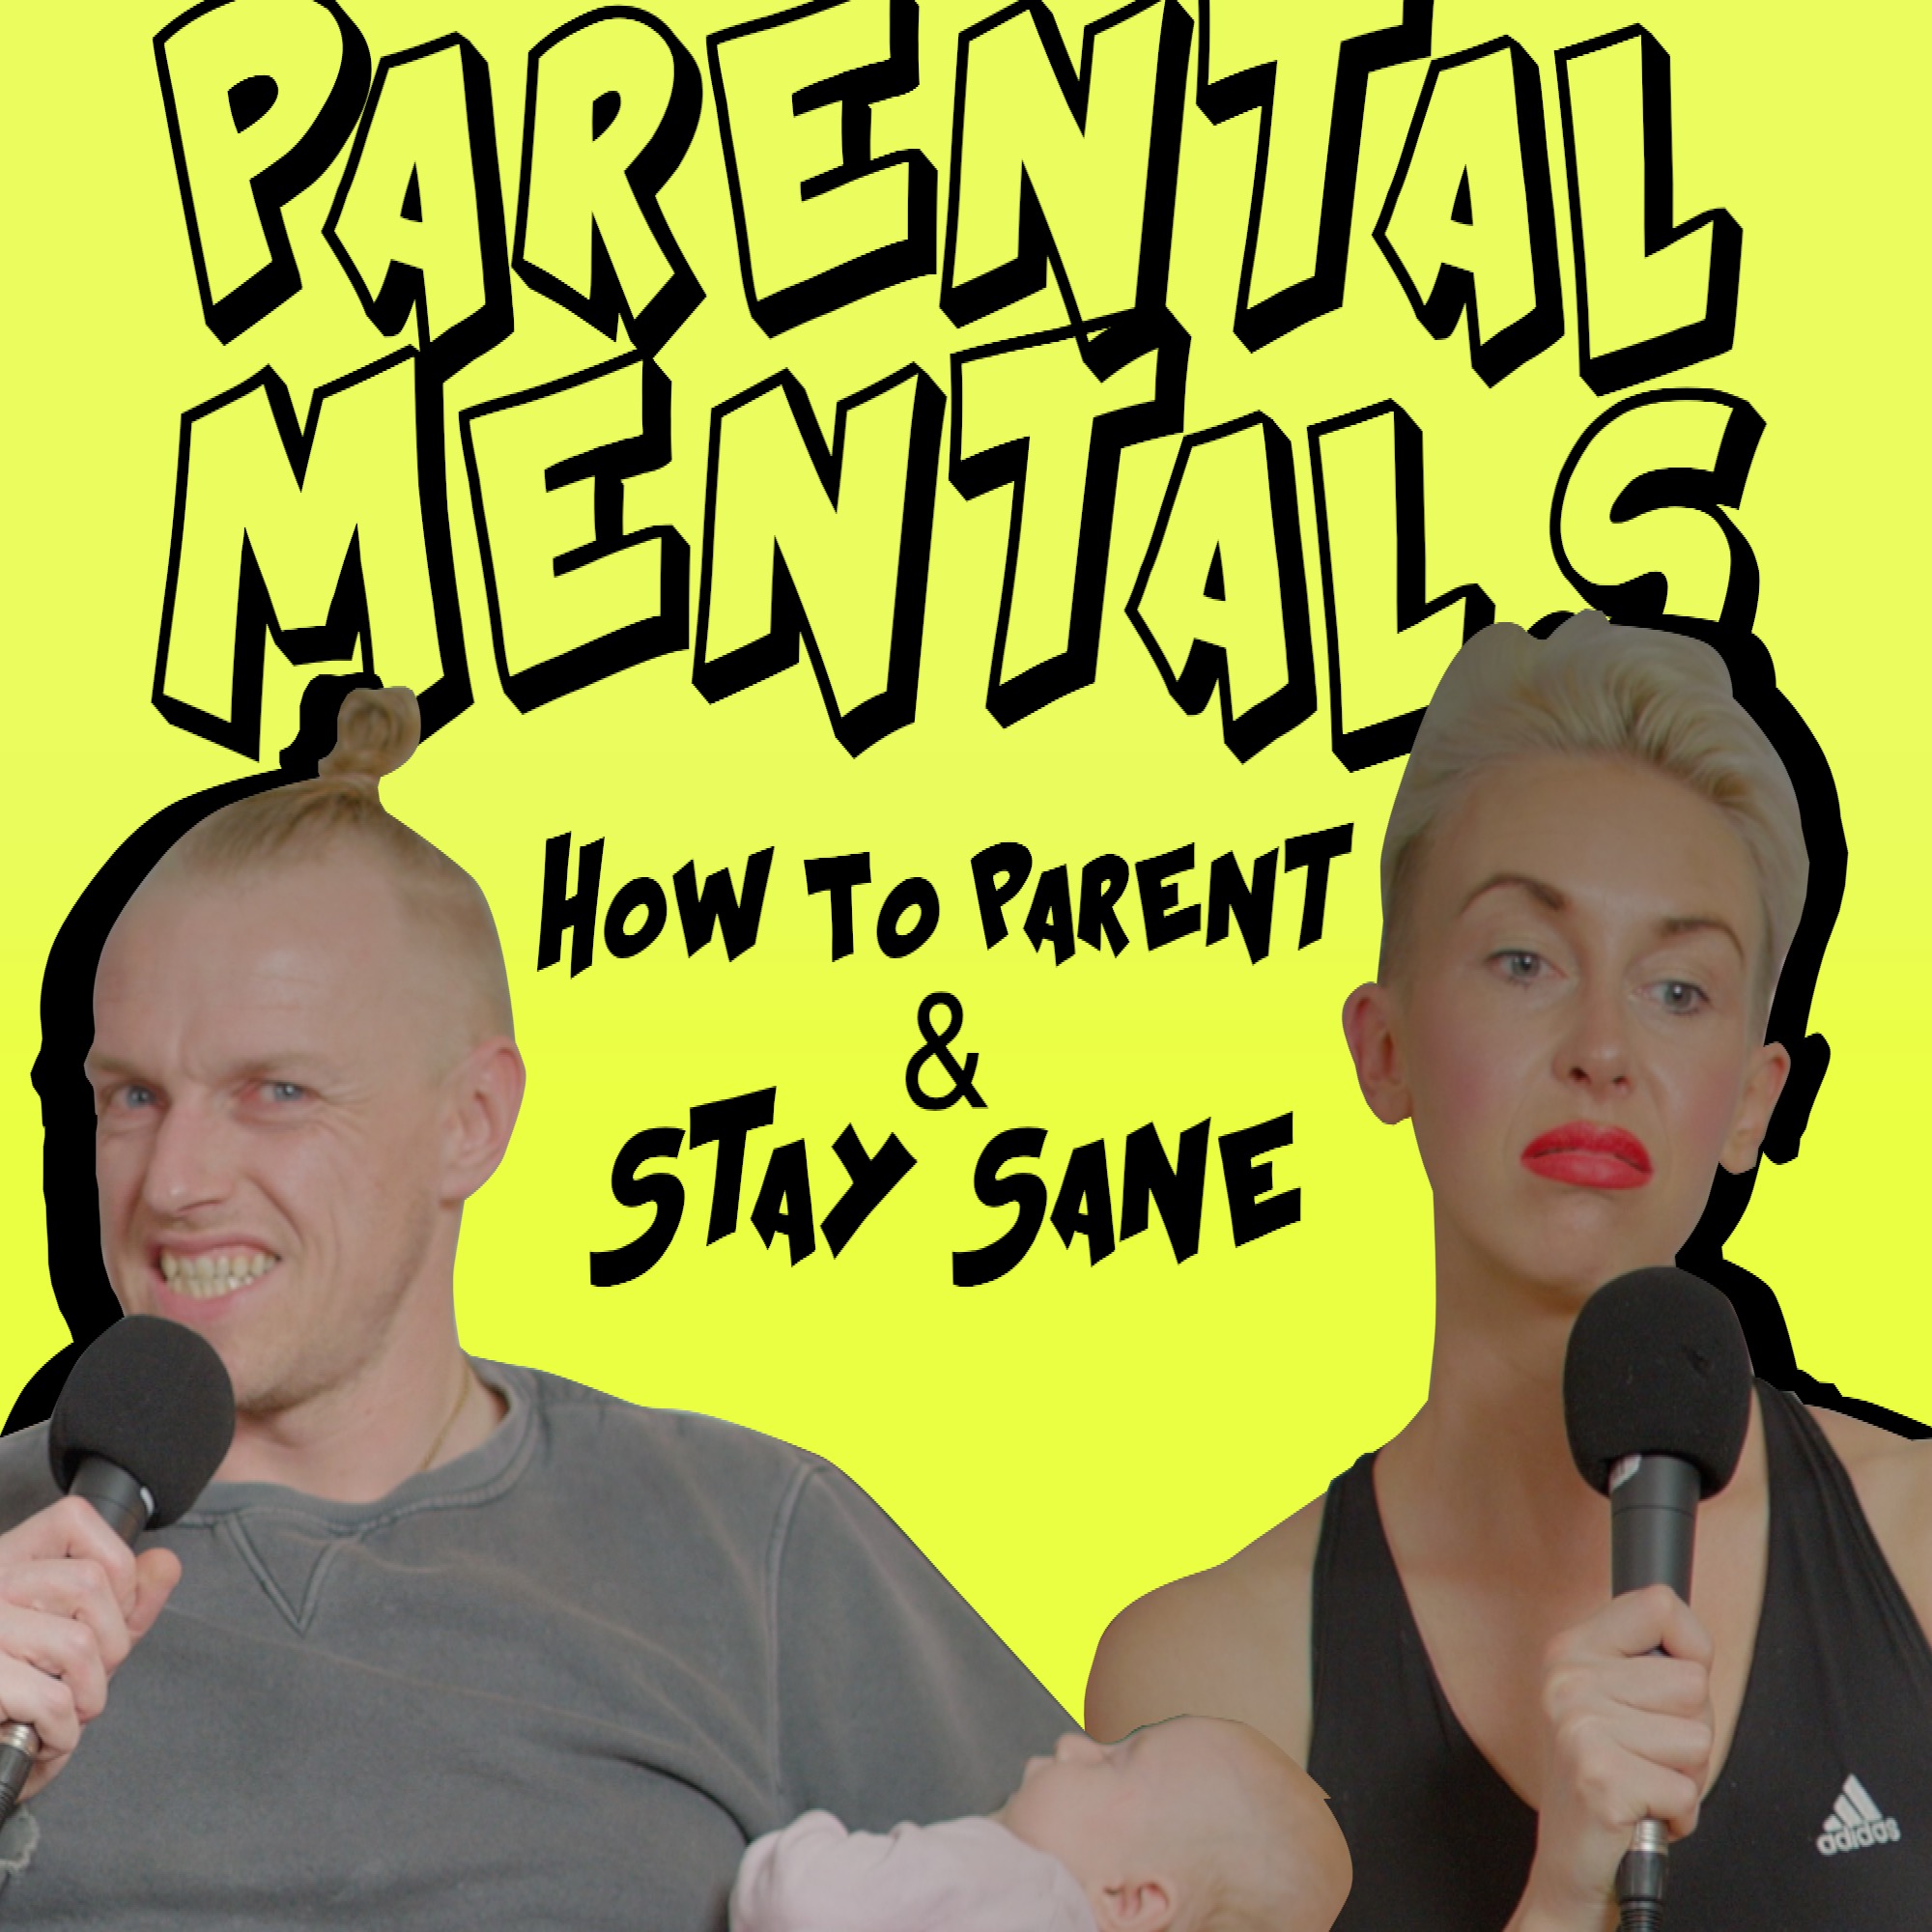 Parental Mentals Ep2 - How to Deal with Covid19